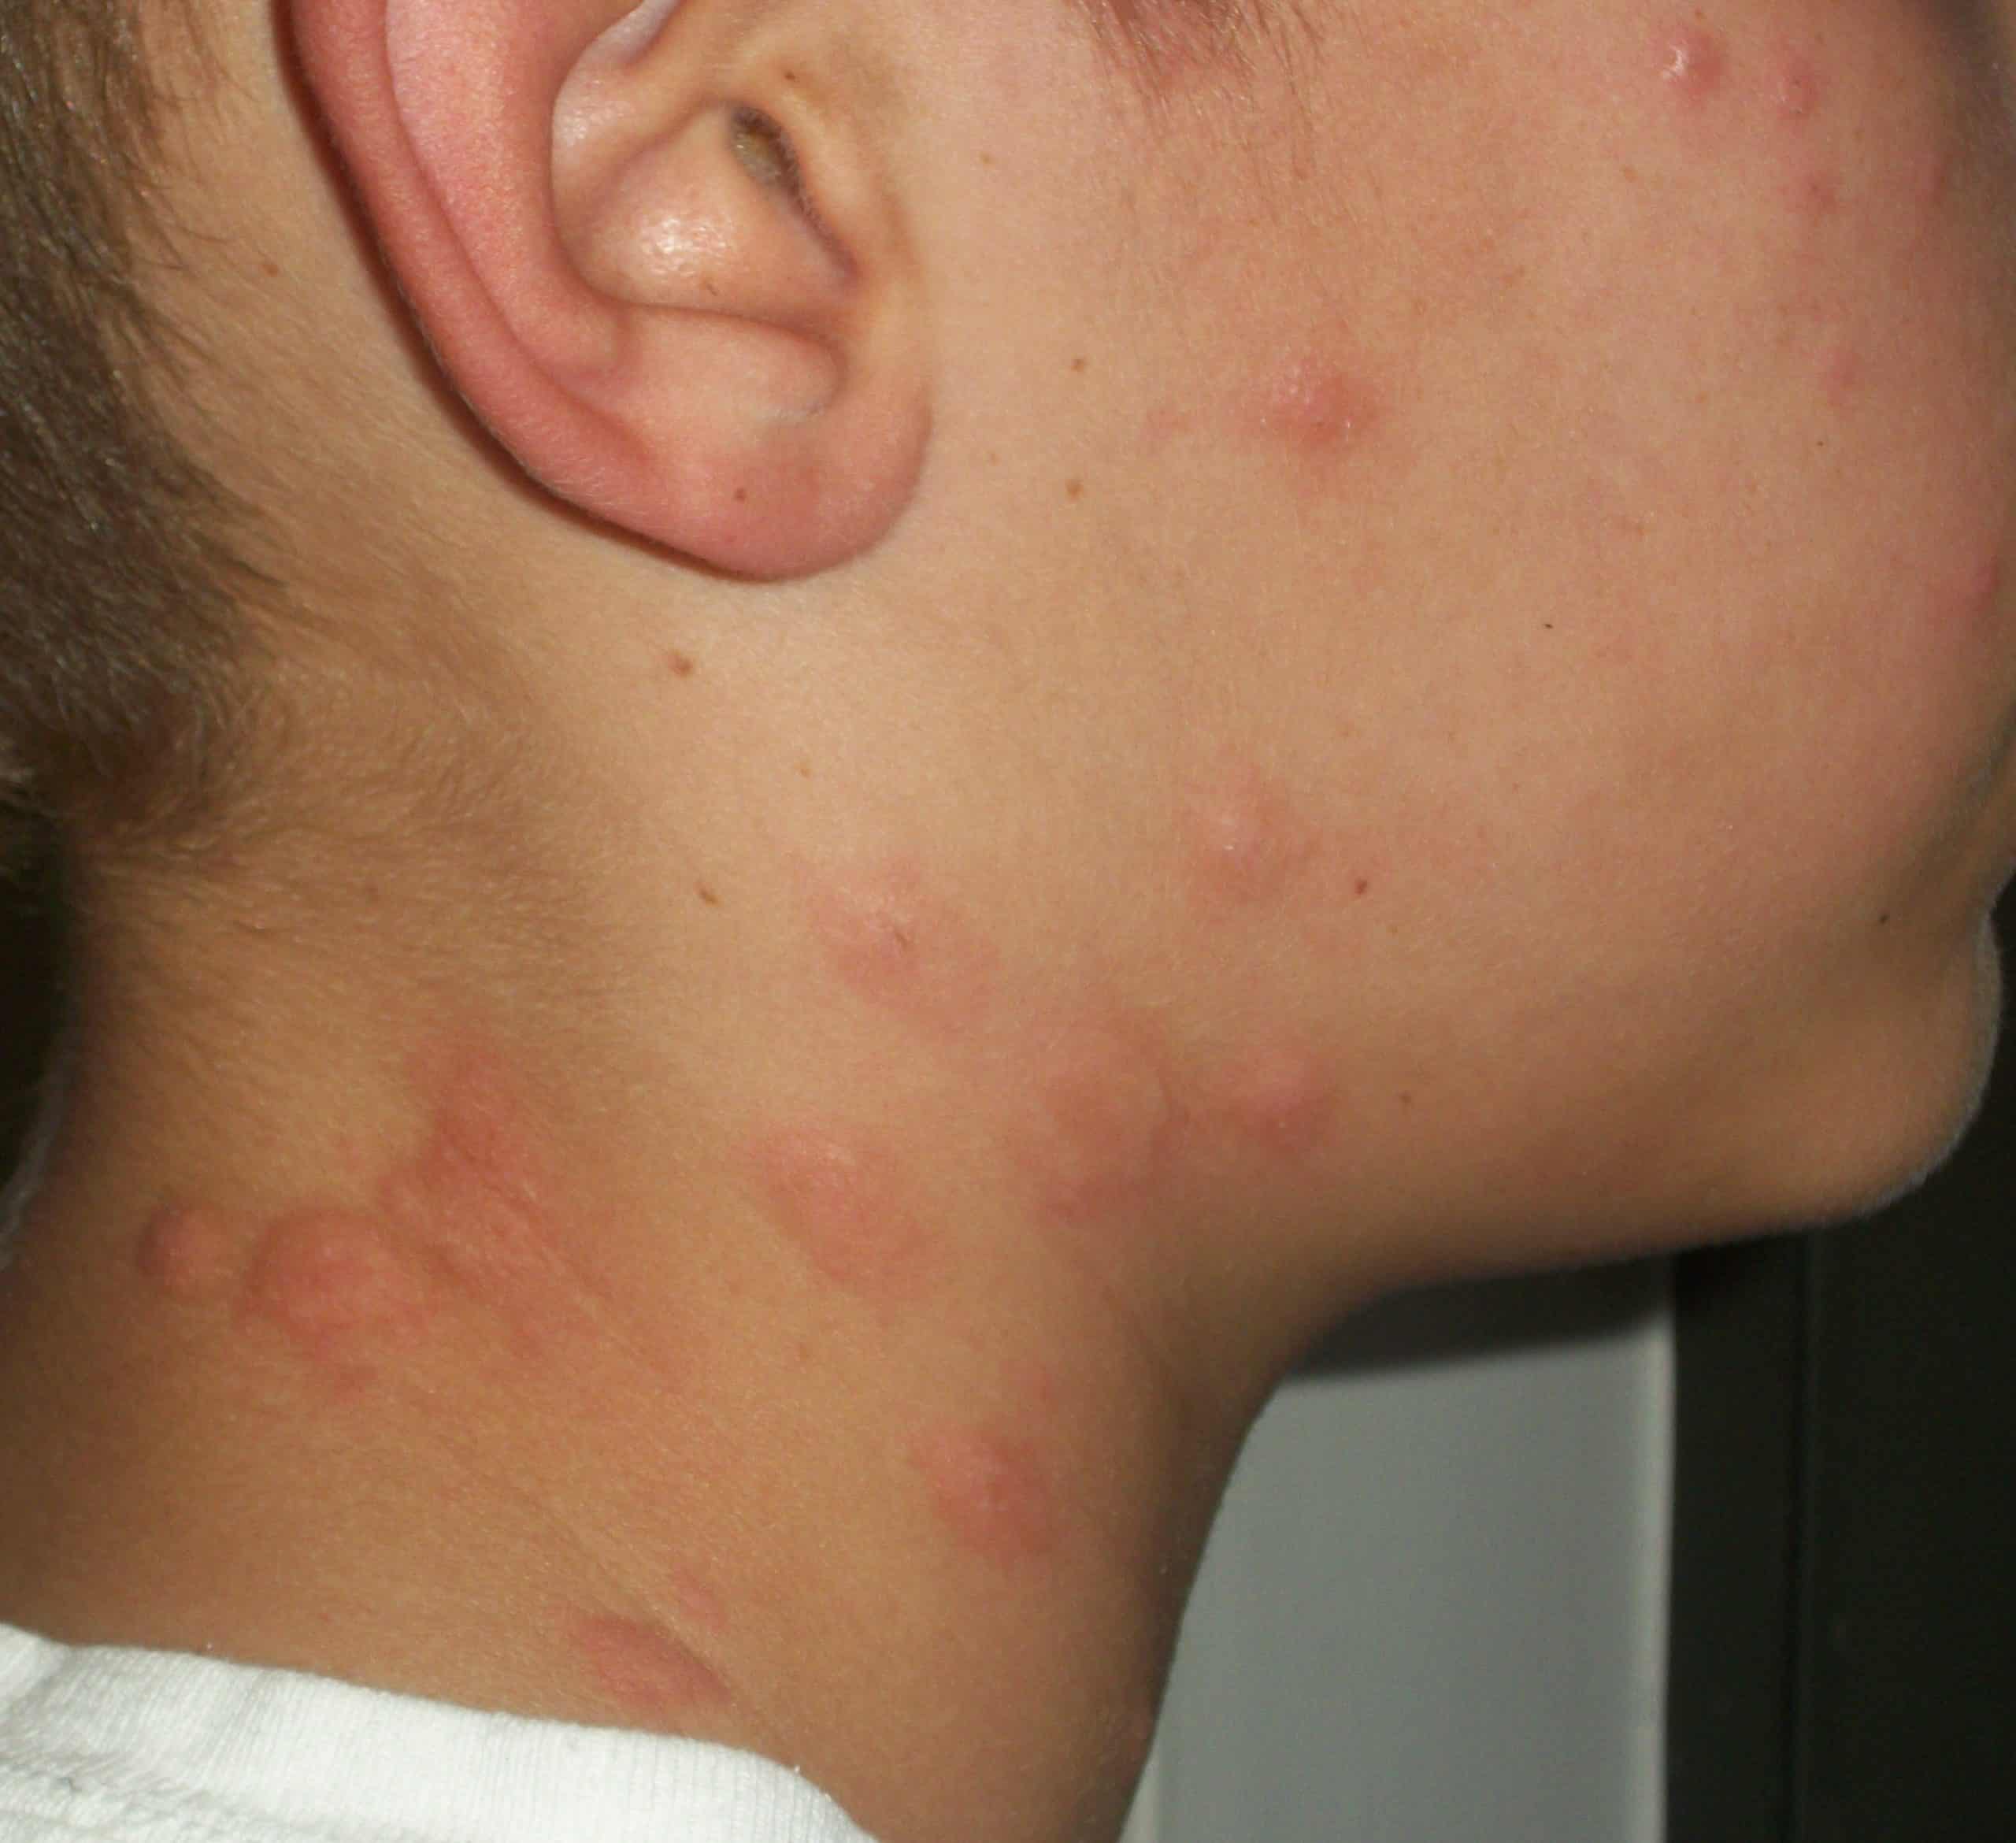 rash..which goes down around the back of his neck..size of a pin head